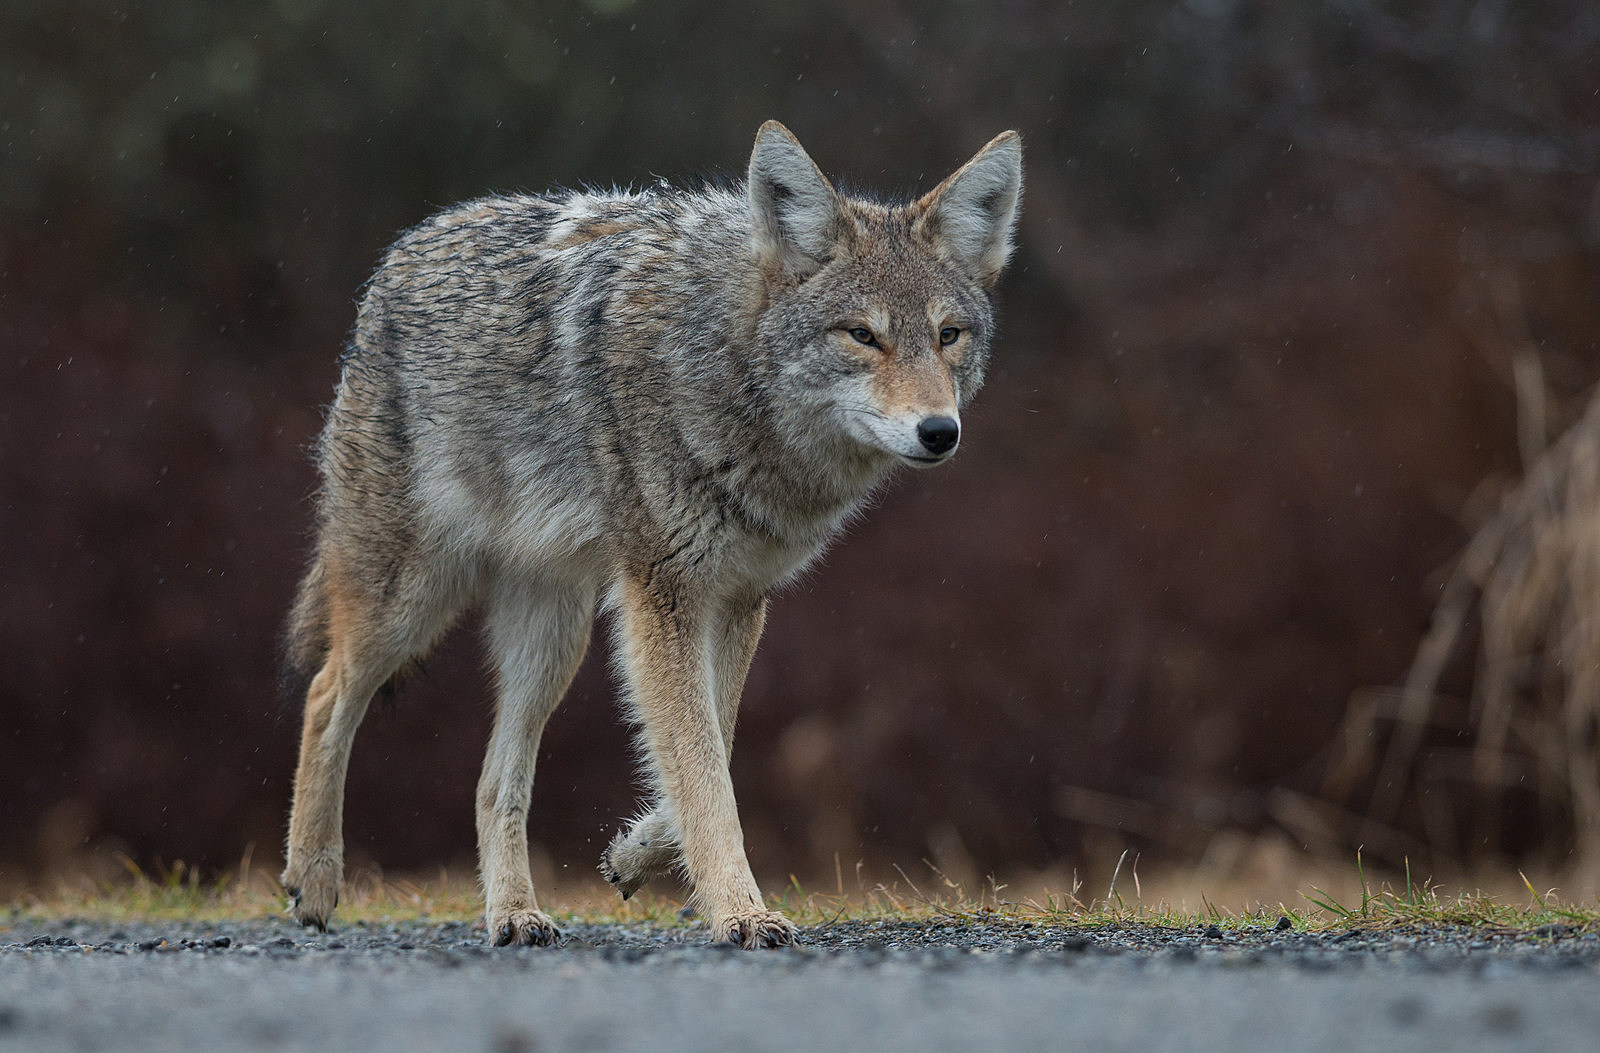 Man Wants Emotional Support Animal Back - It's A Coyote